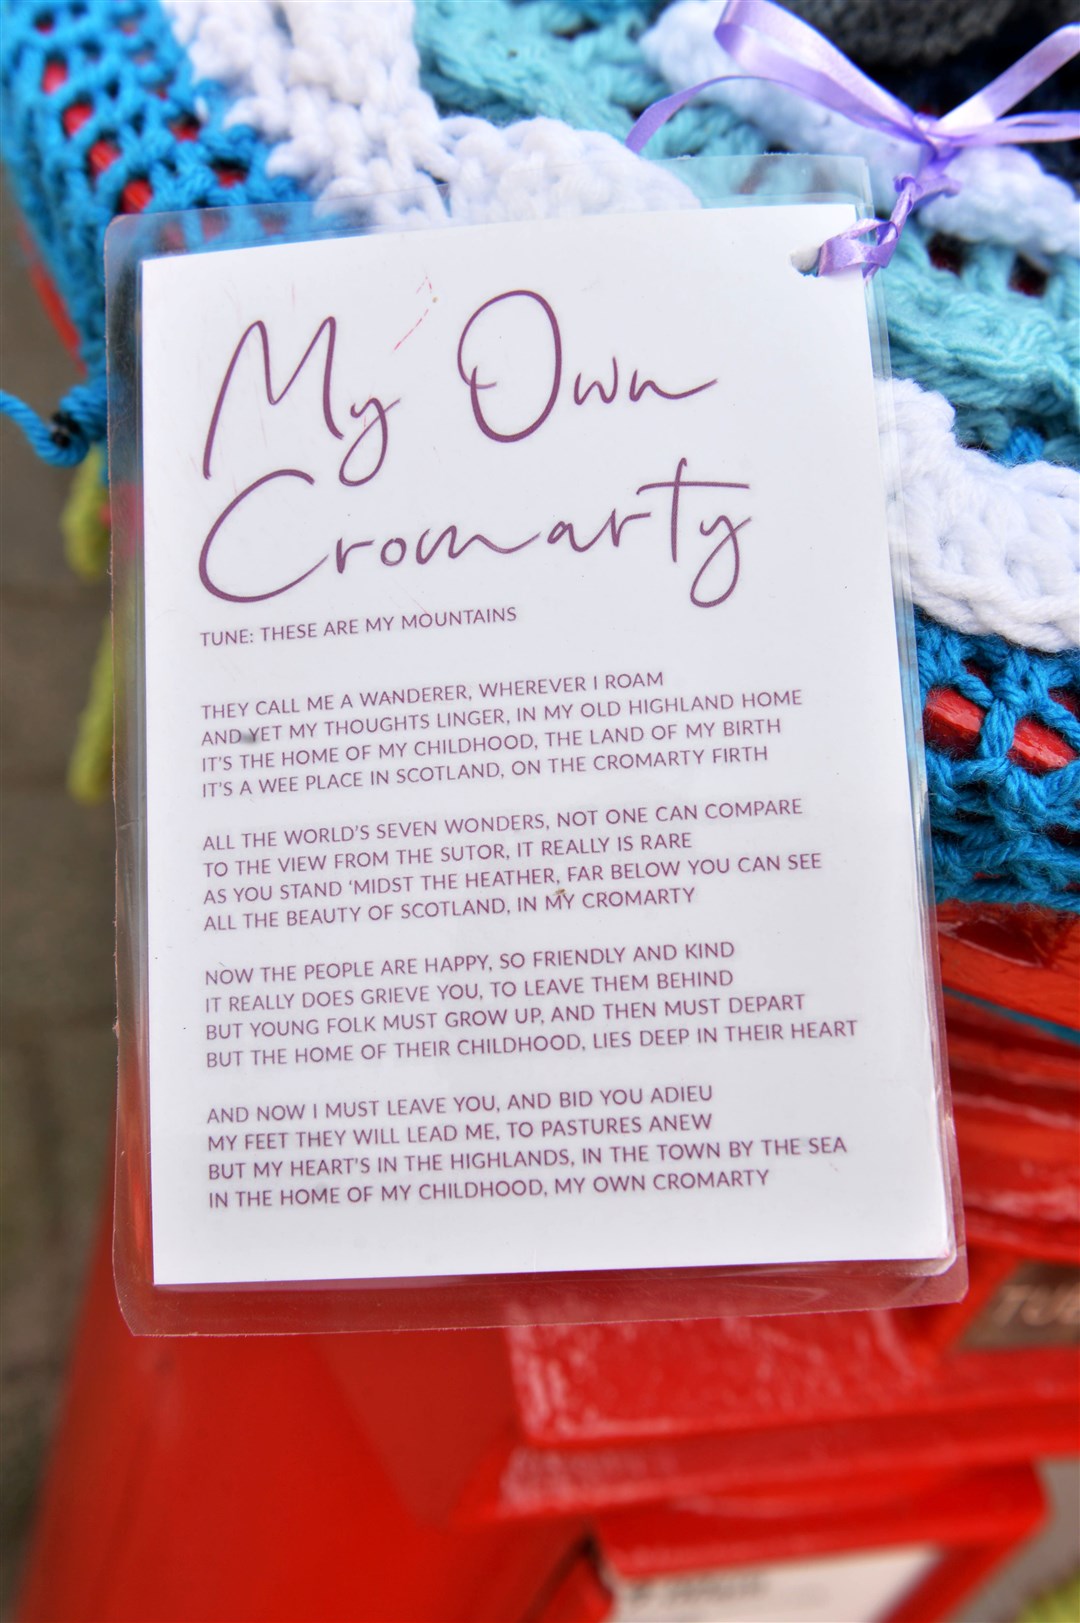 The yarn bomber also left a love letter to Cromarty.